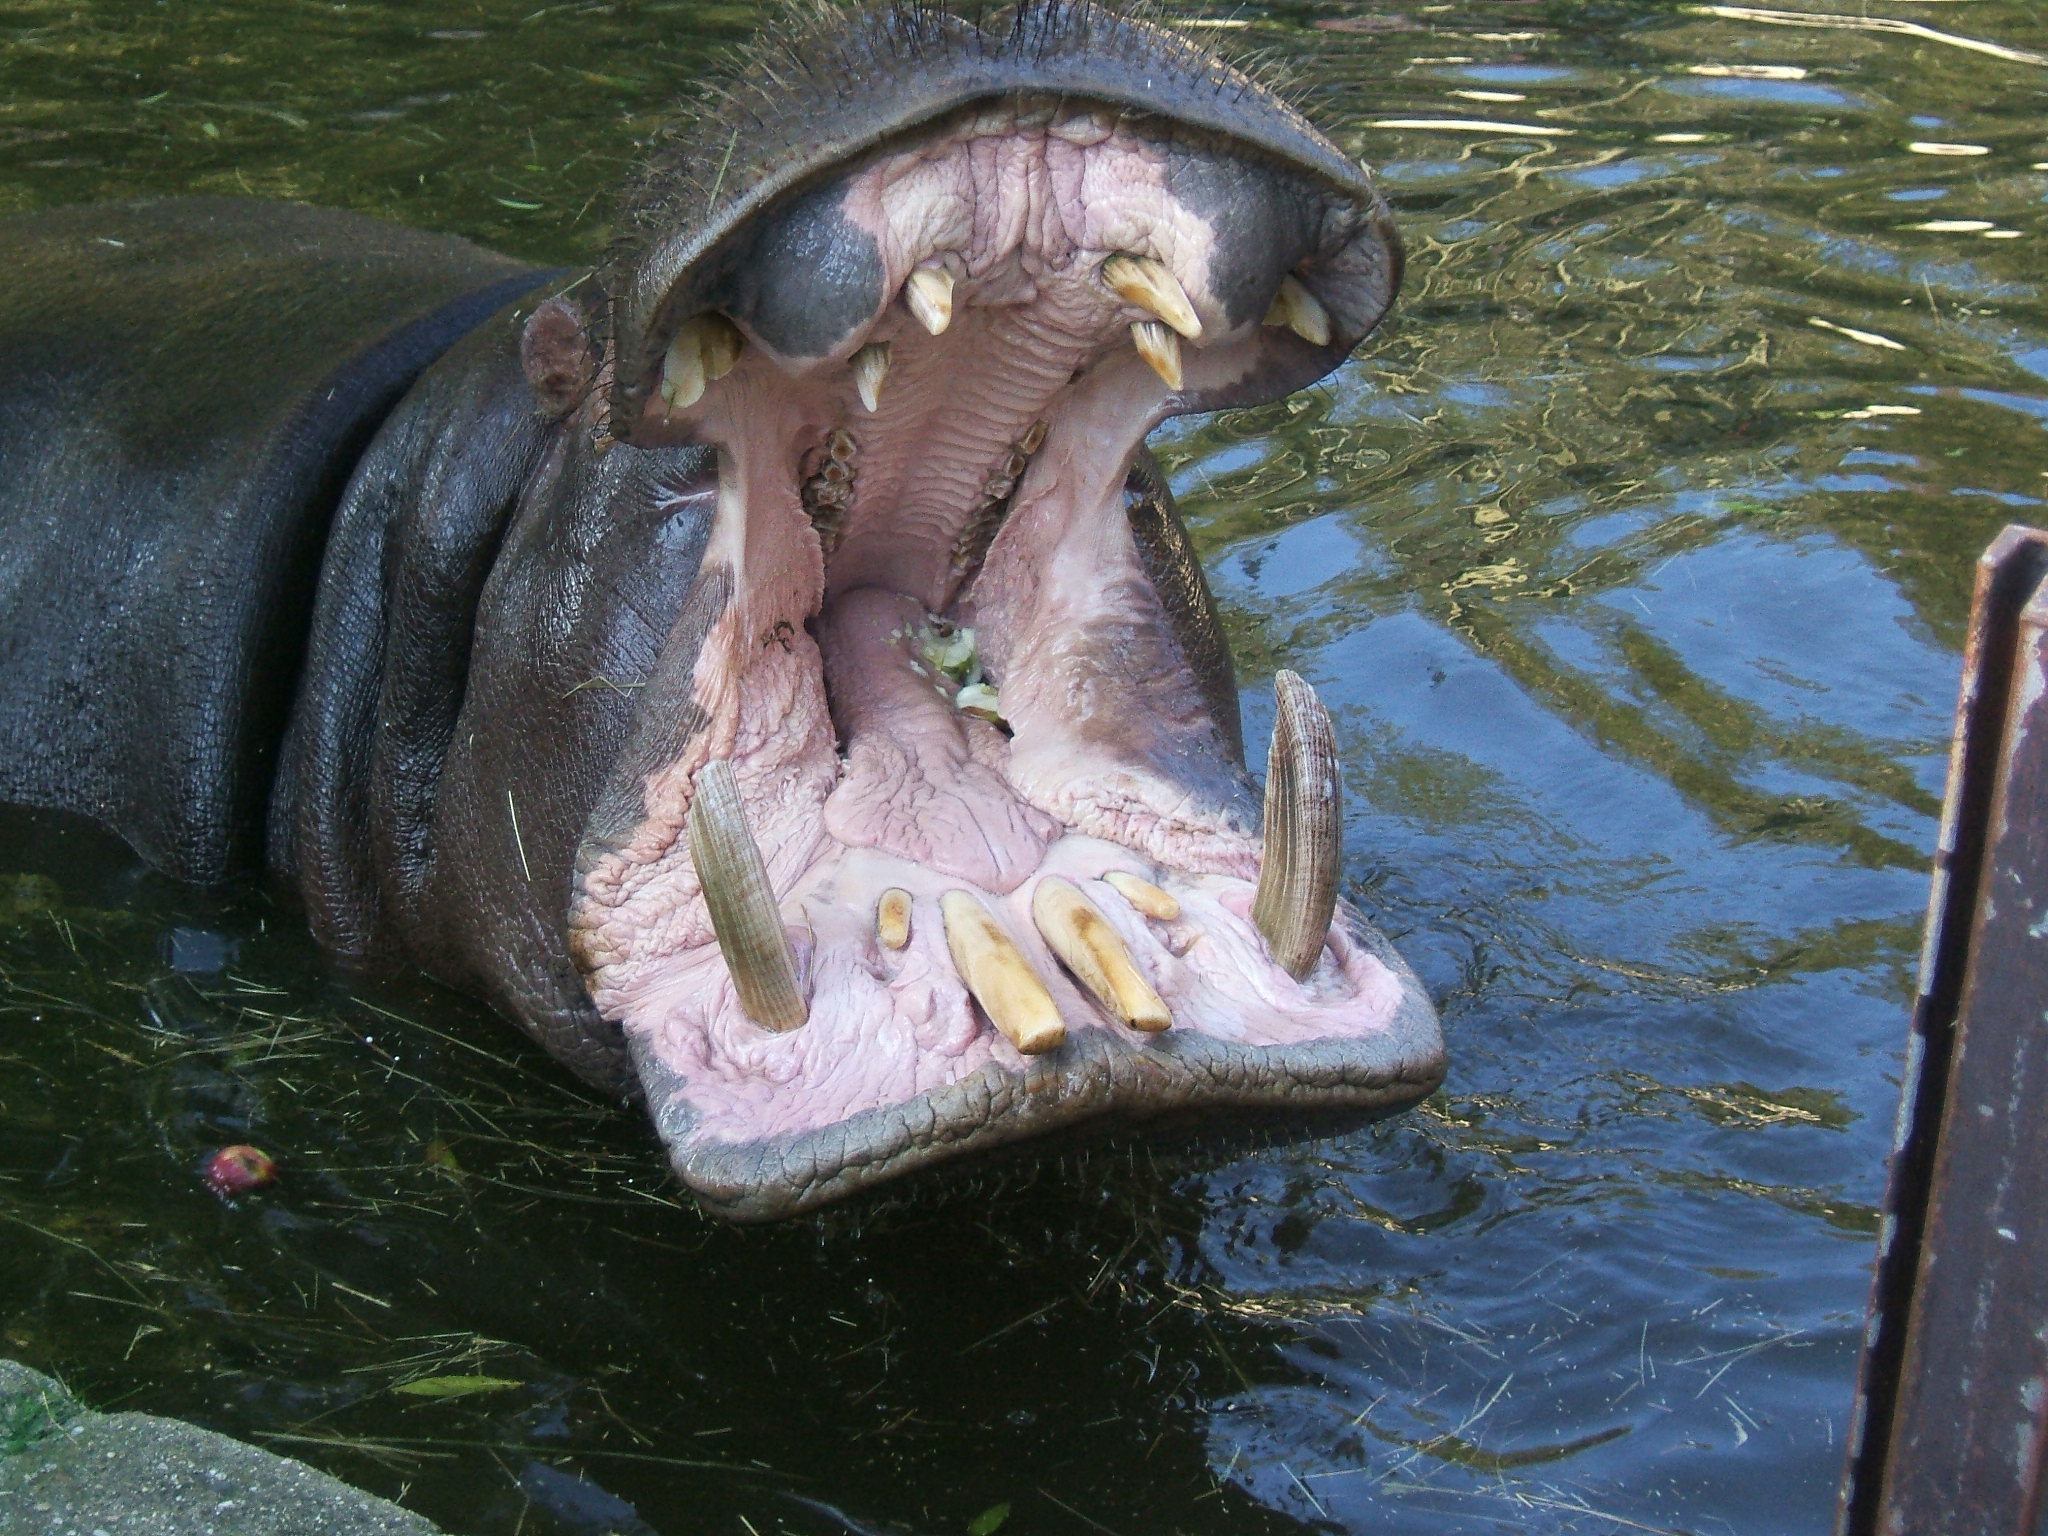 there is a hippopotamus roaring in the water